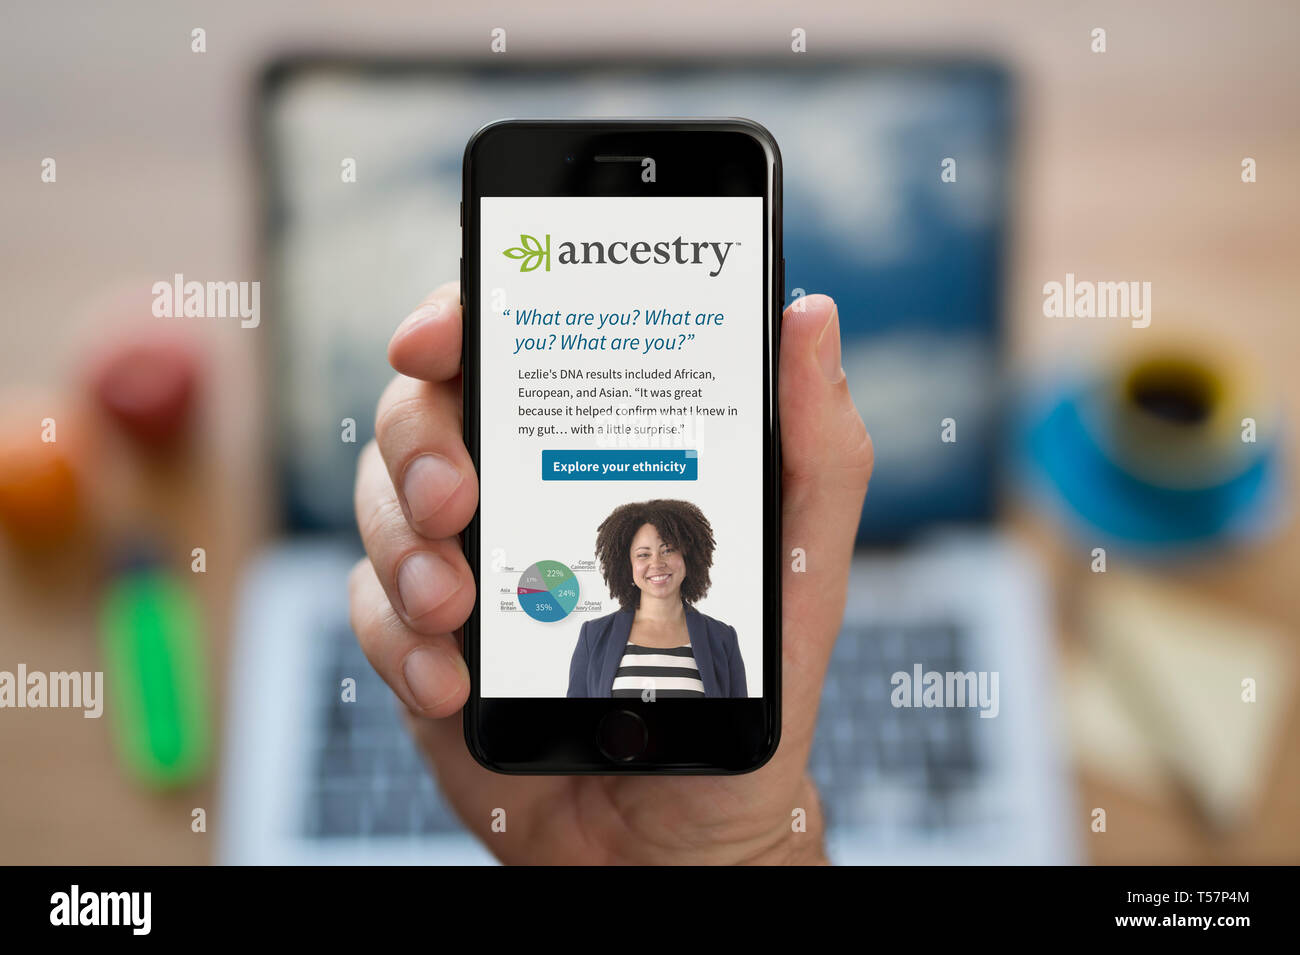 A man looks at his iPhone which displays the Ancestry logo (Editorial use only). Stock Photo